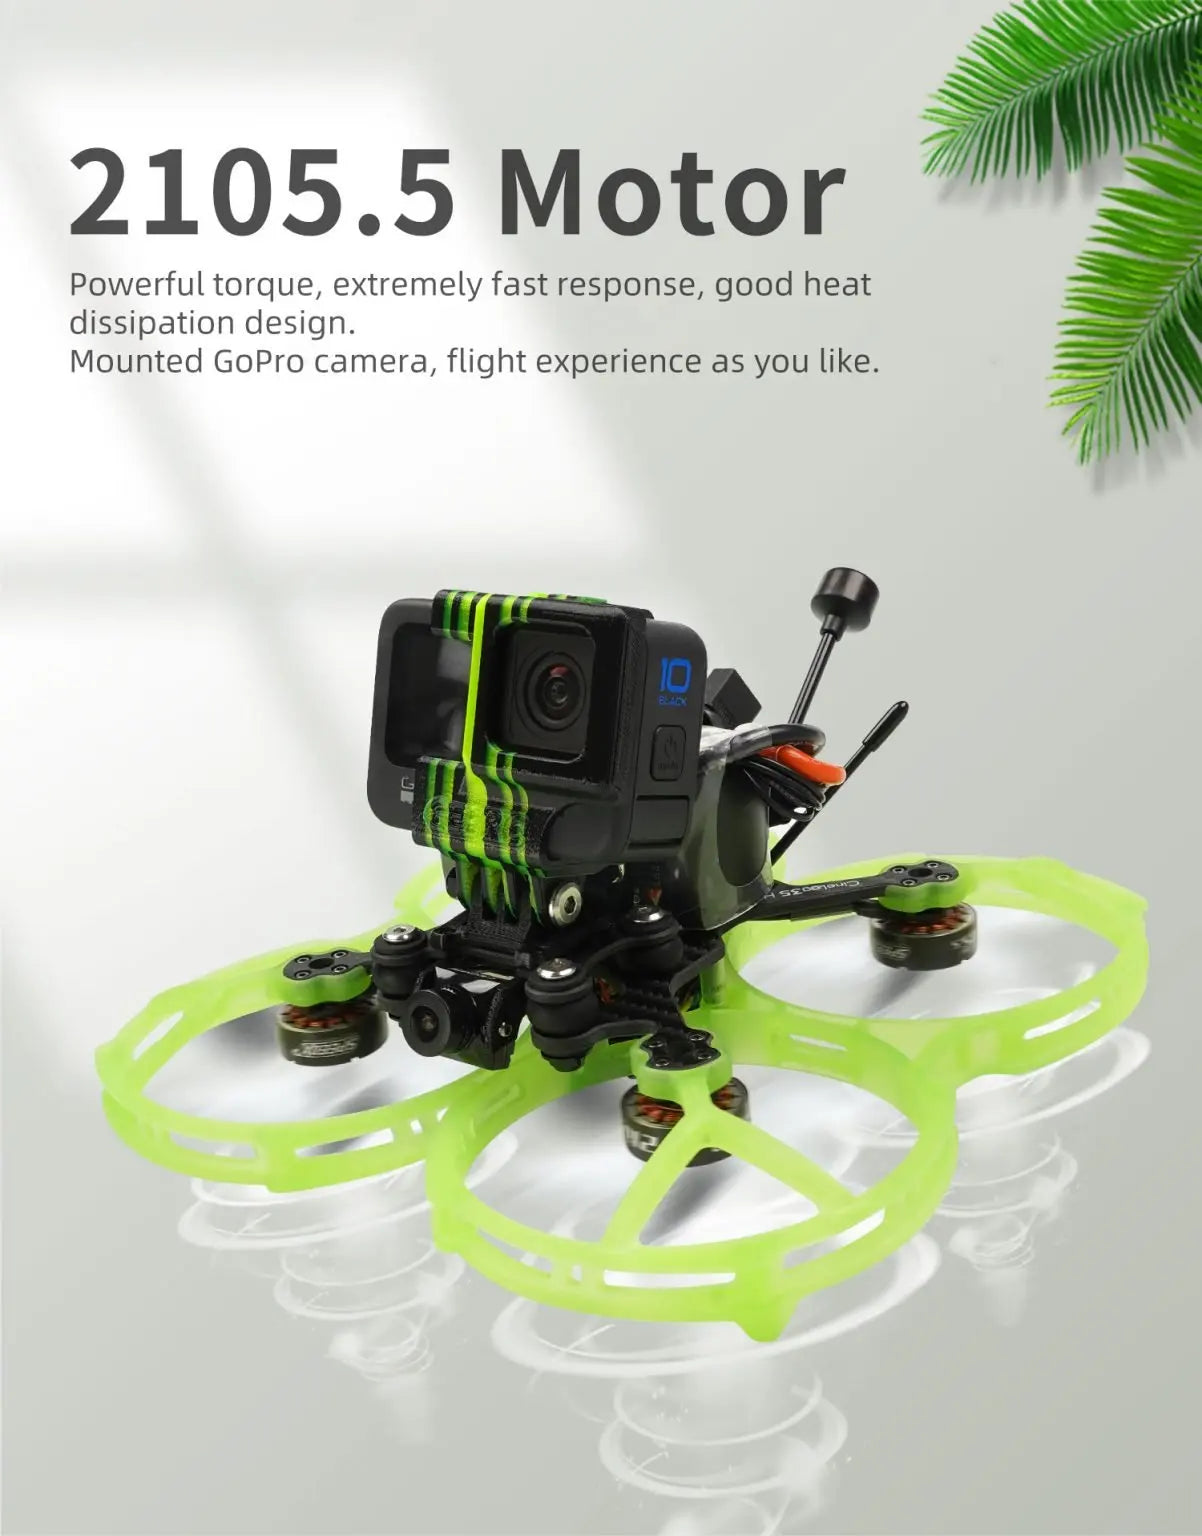 GEPRC CineLog35 Cinewhoop FPV Drone, 2105.5 Motor Powerful torque, extremely fast response, heat dissipation design